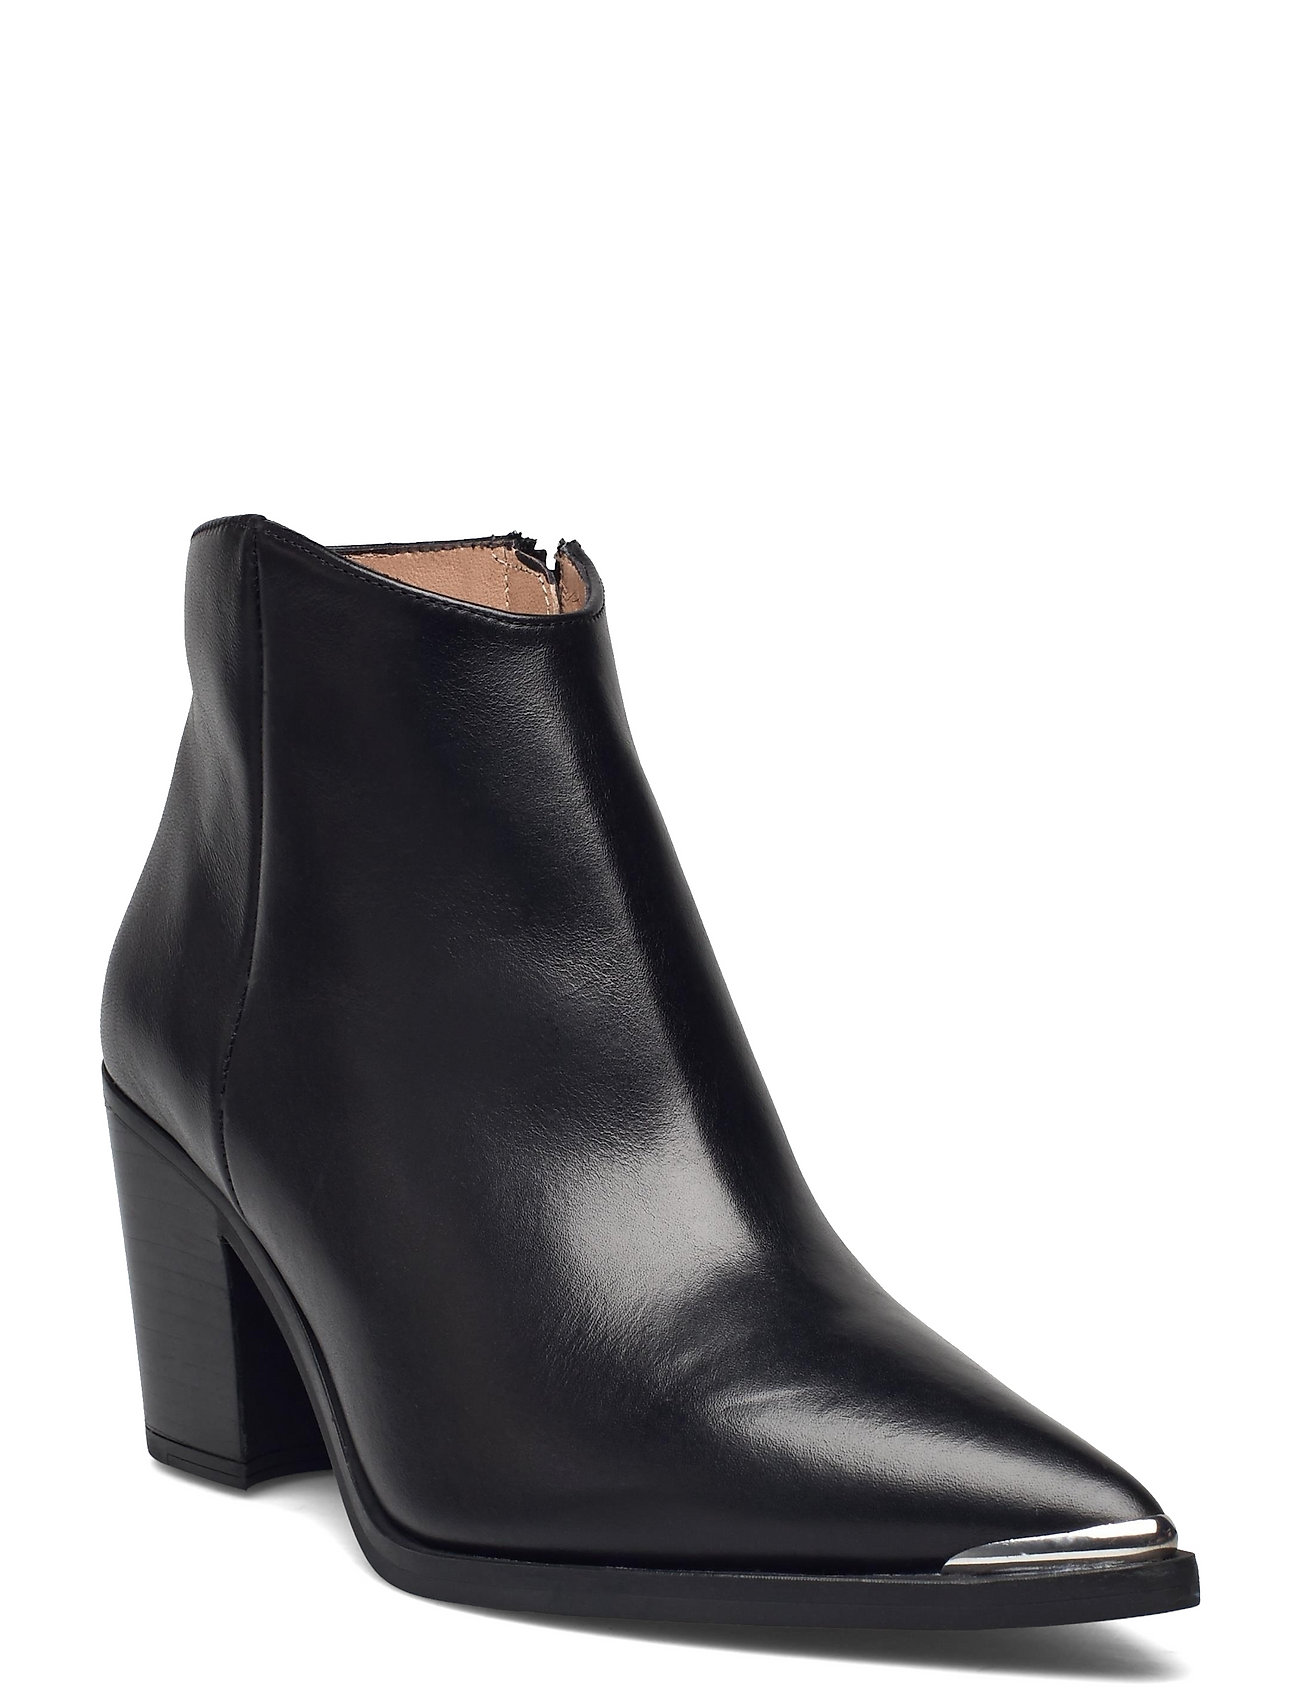 Modor_sco Shoes Boots Ankle Boots Ankle Boot - Heel Musta UNISA